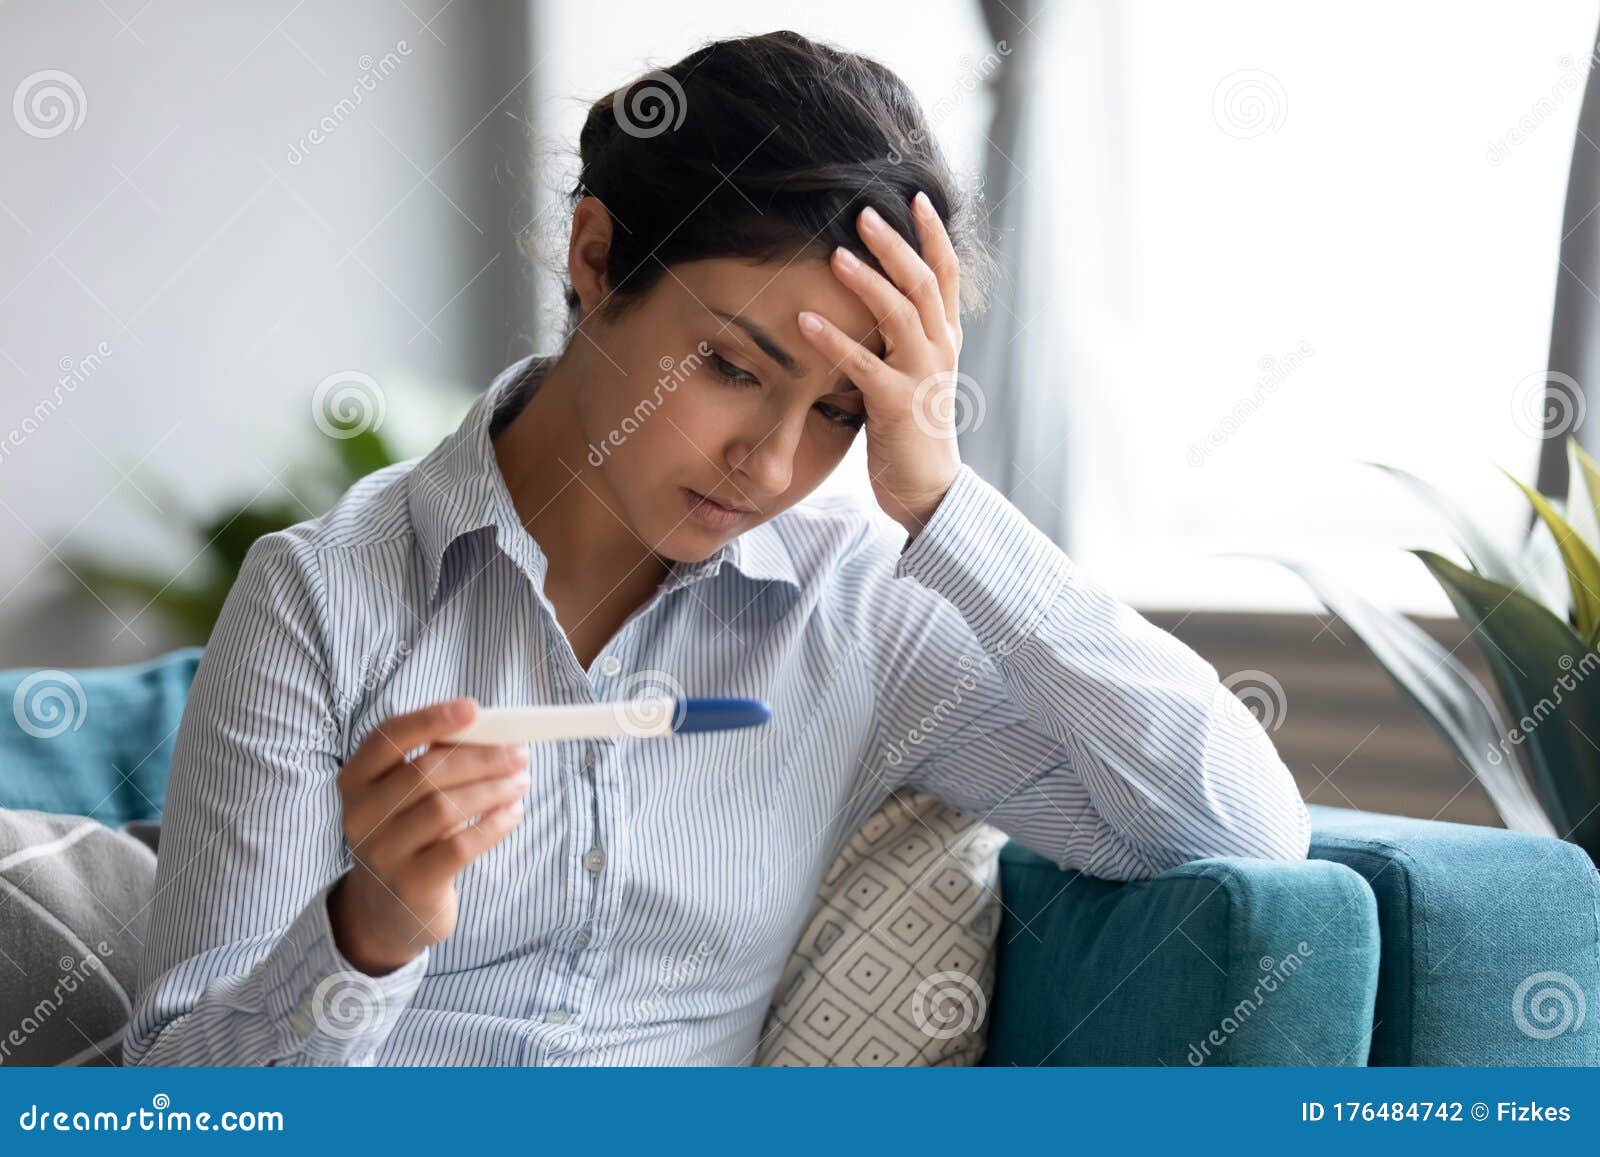 unhappy indian woman looking at pregnancy test, upset by result